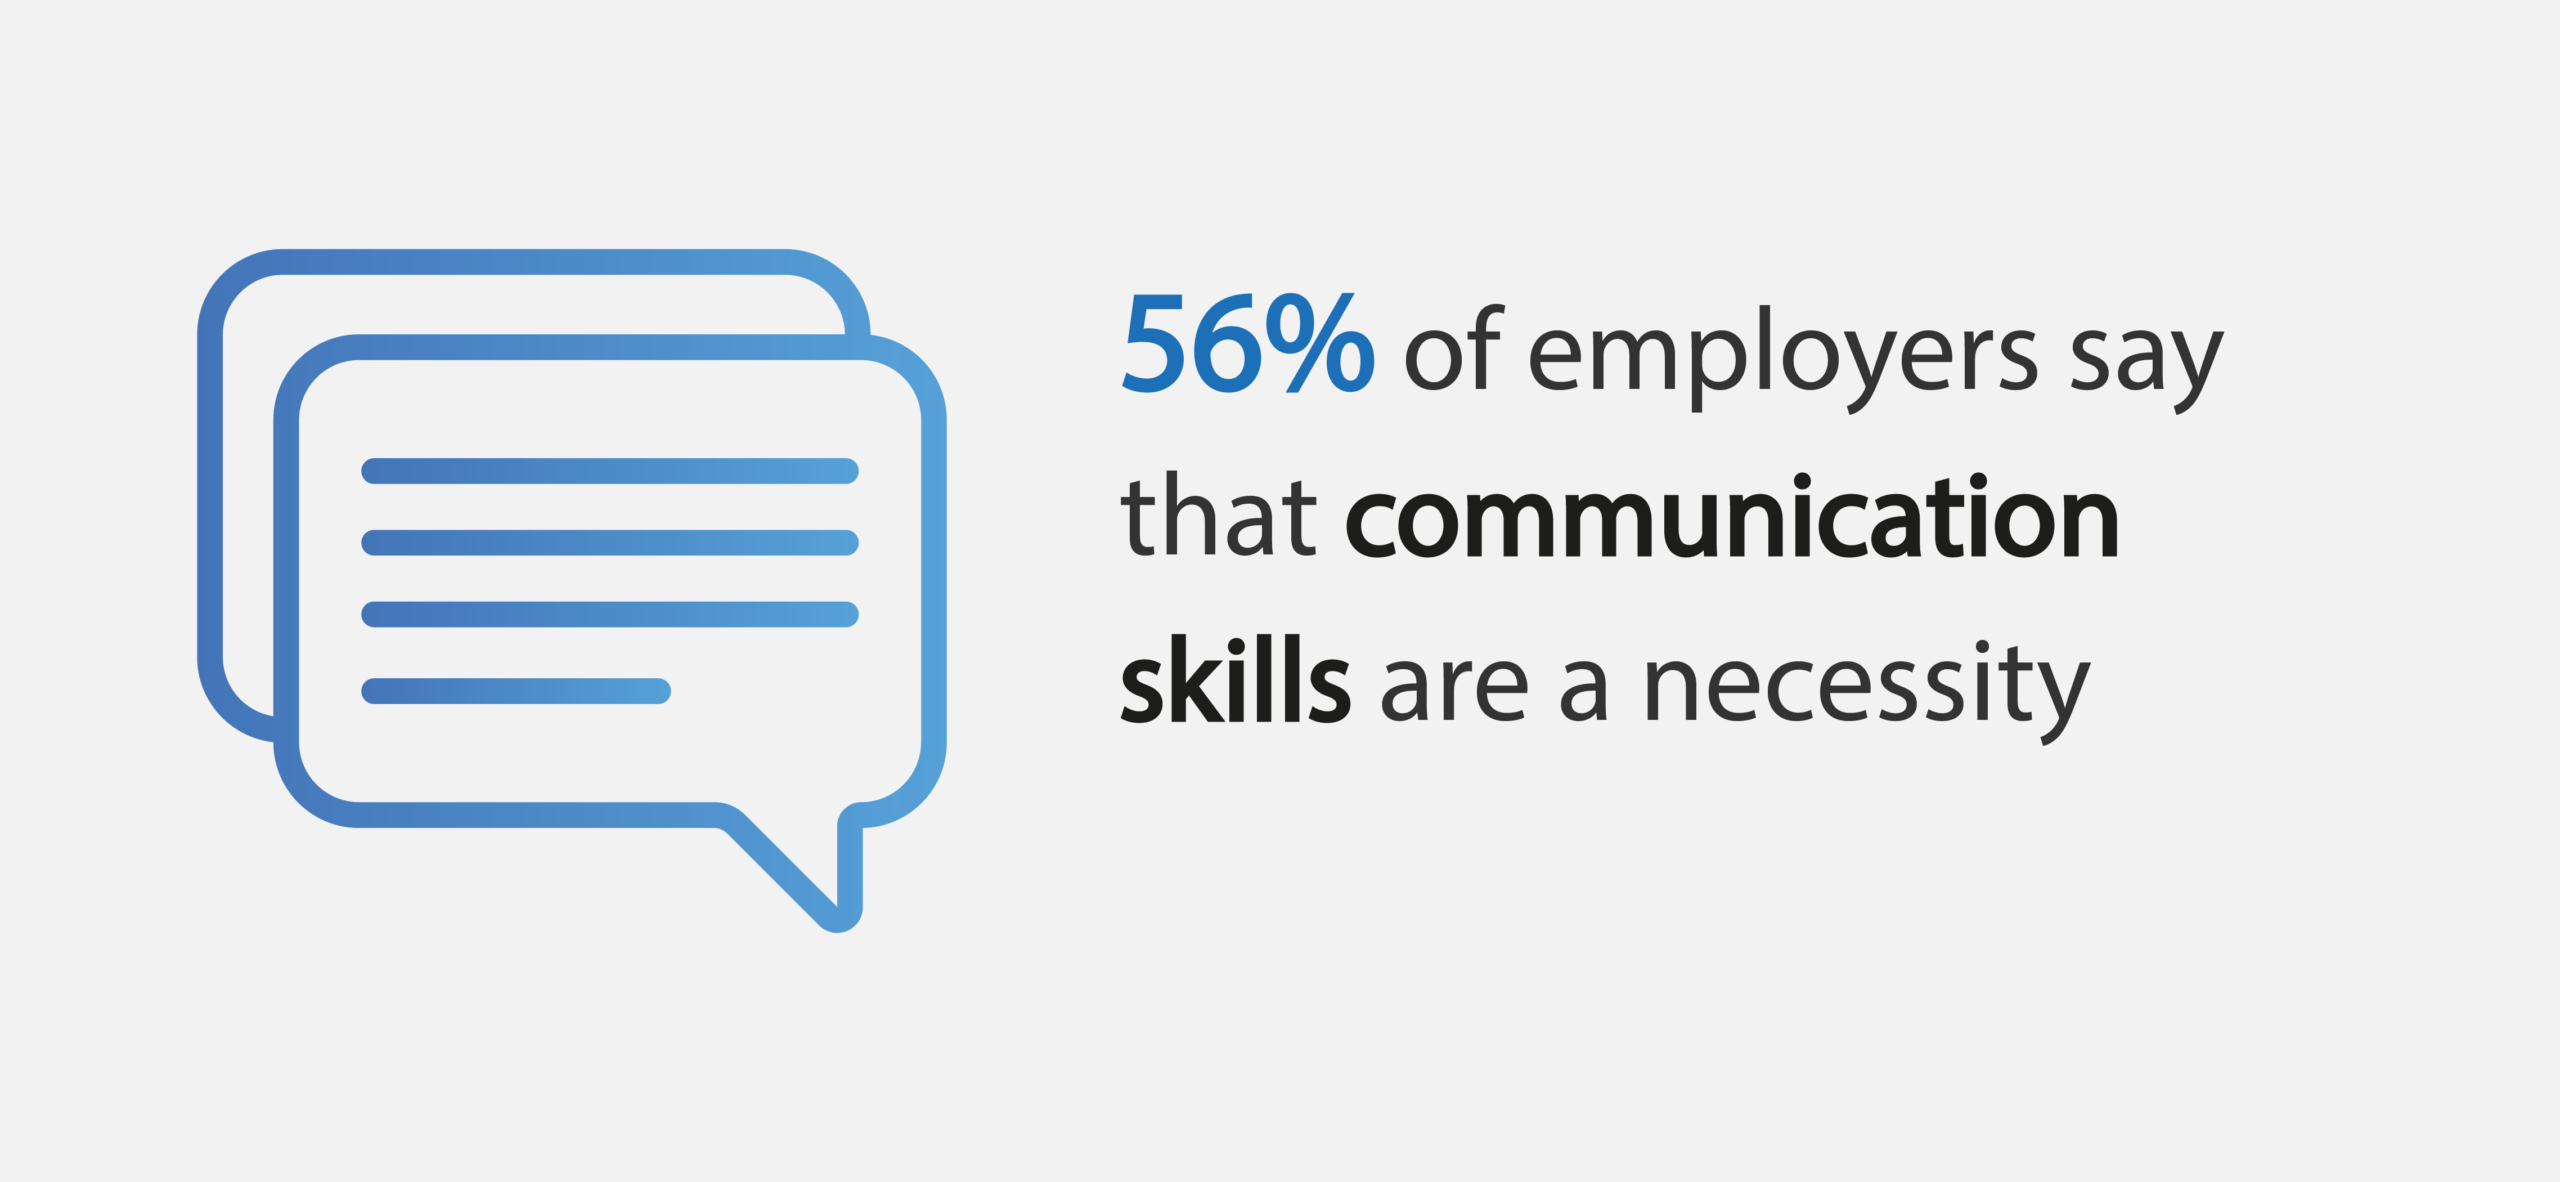 Communication skills at a job interview are a necessity, 56% of employers say